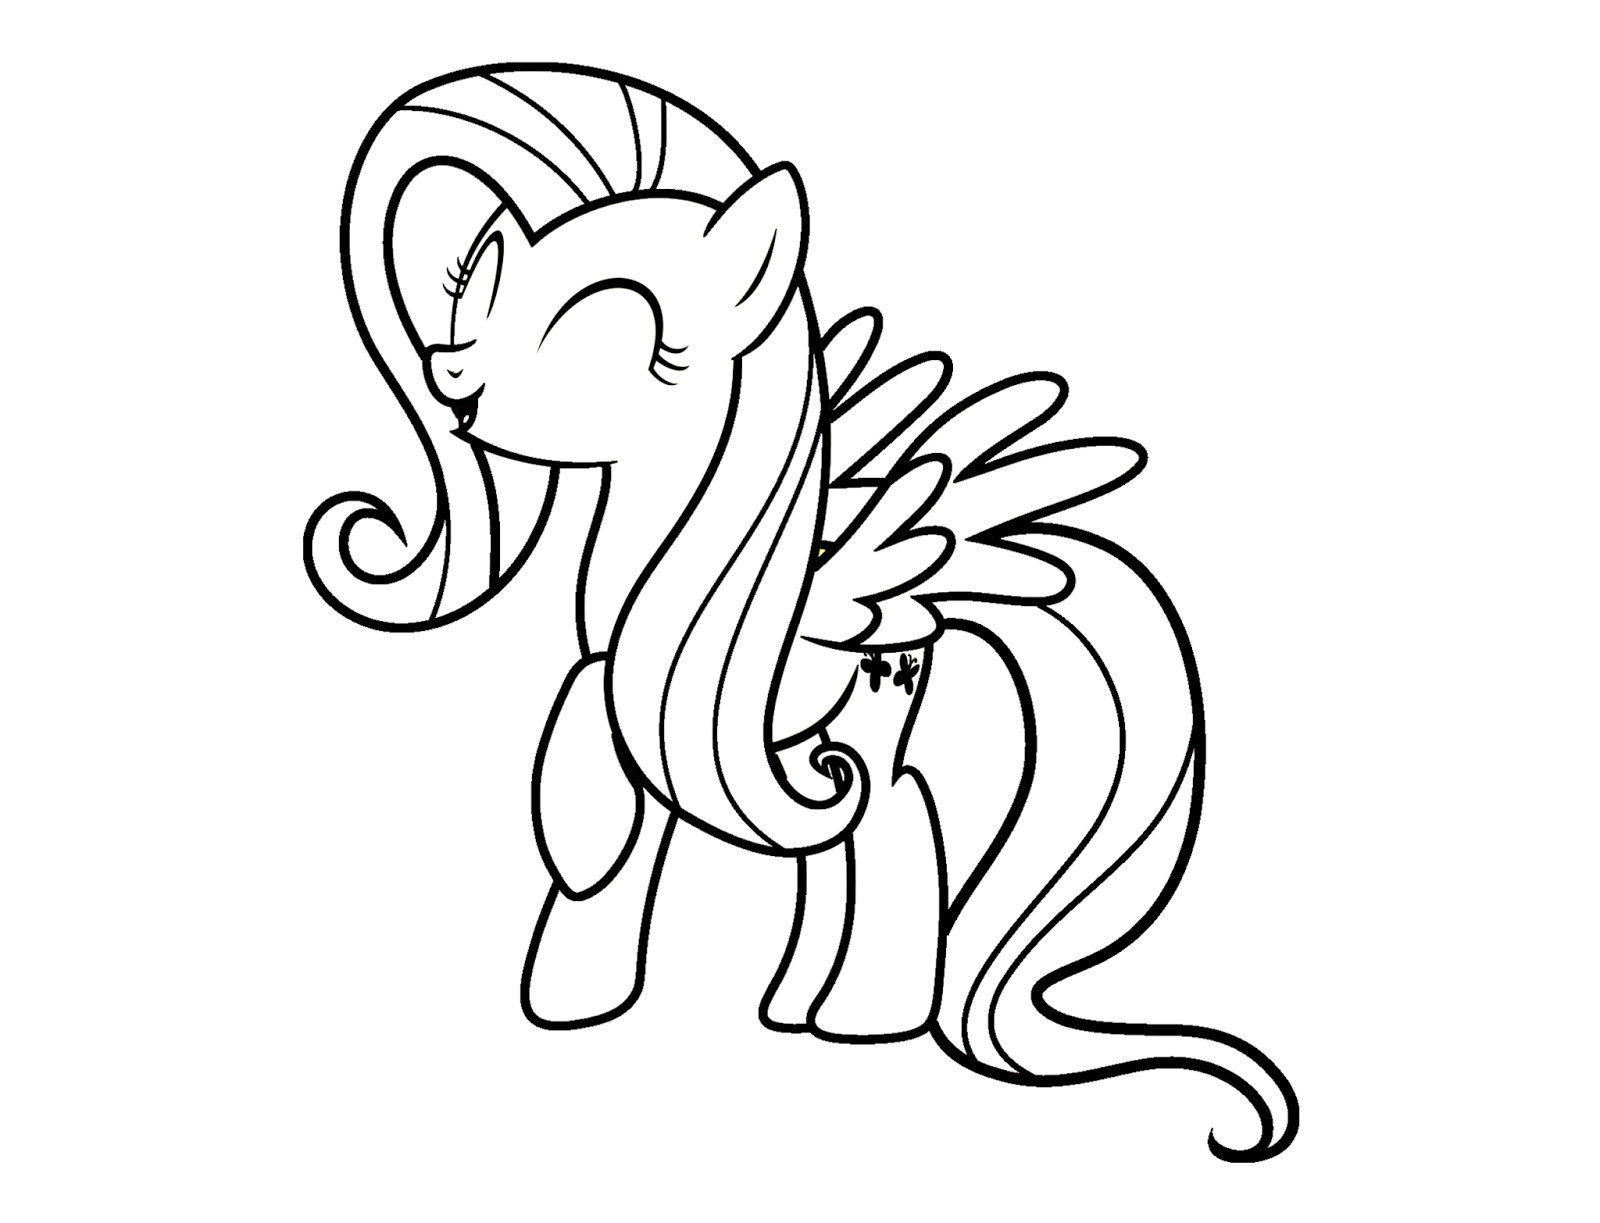 Coloring Pages For Kids Free
 Free my little pony coloring pages Coloring pages for kids